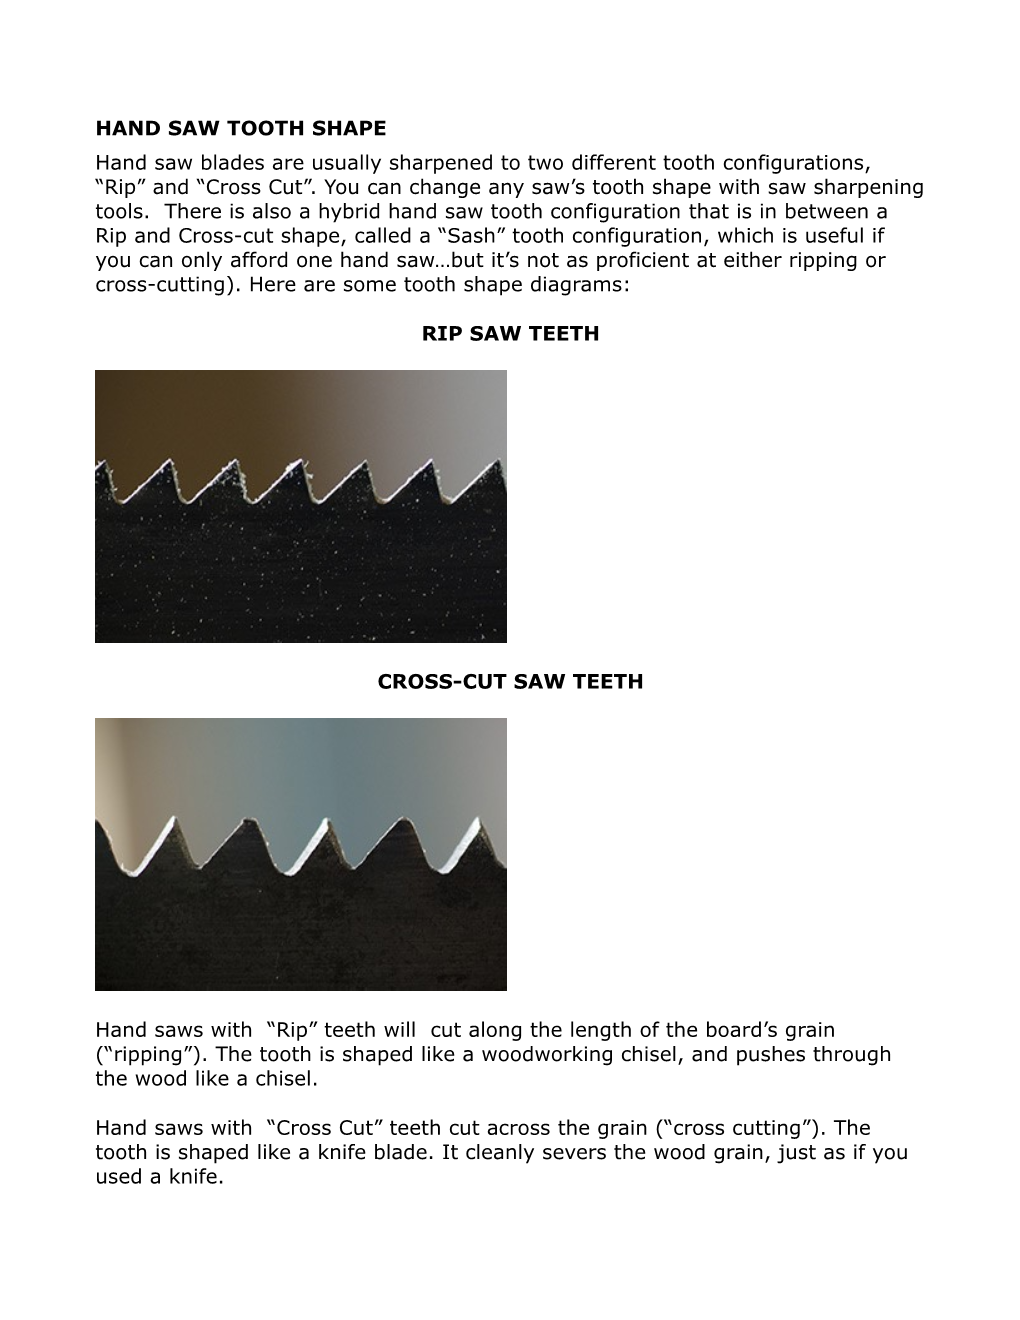 And “Cross Cut”. You Can Change Any Saw’S Tooth Shape with Saw Sharpening Tools